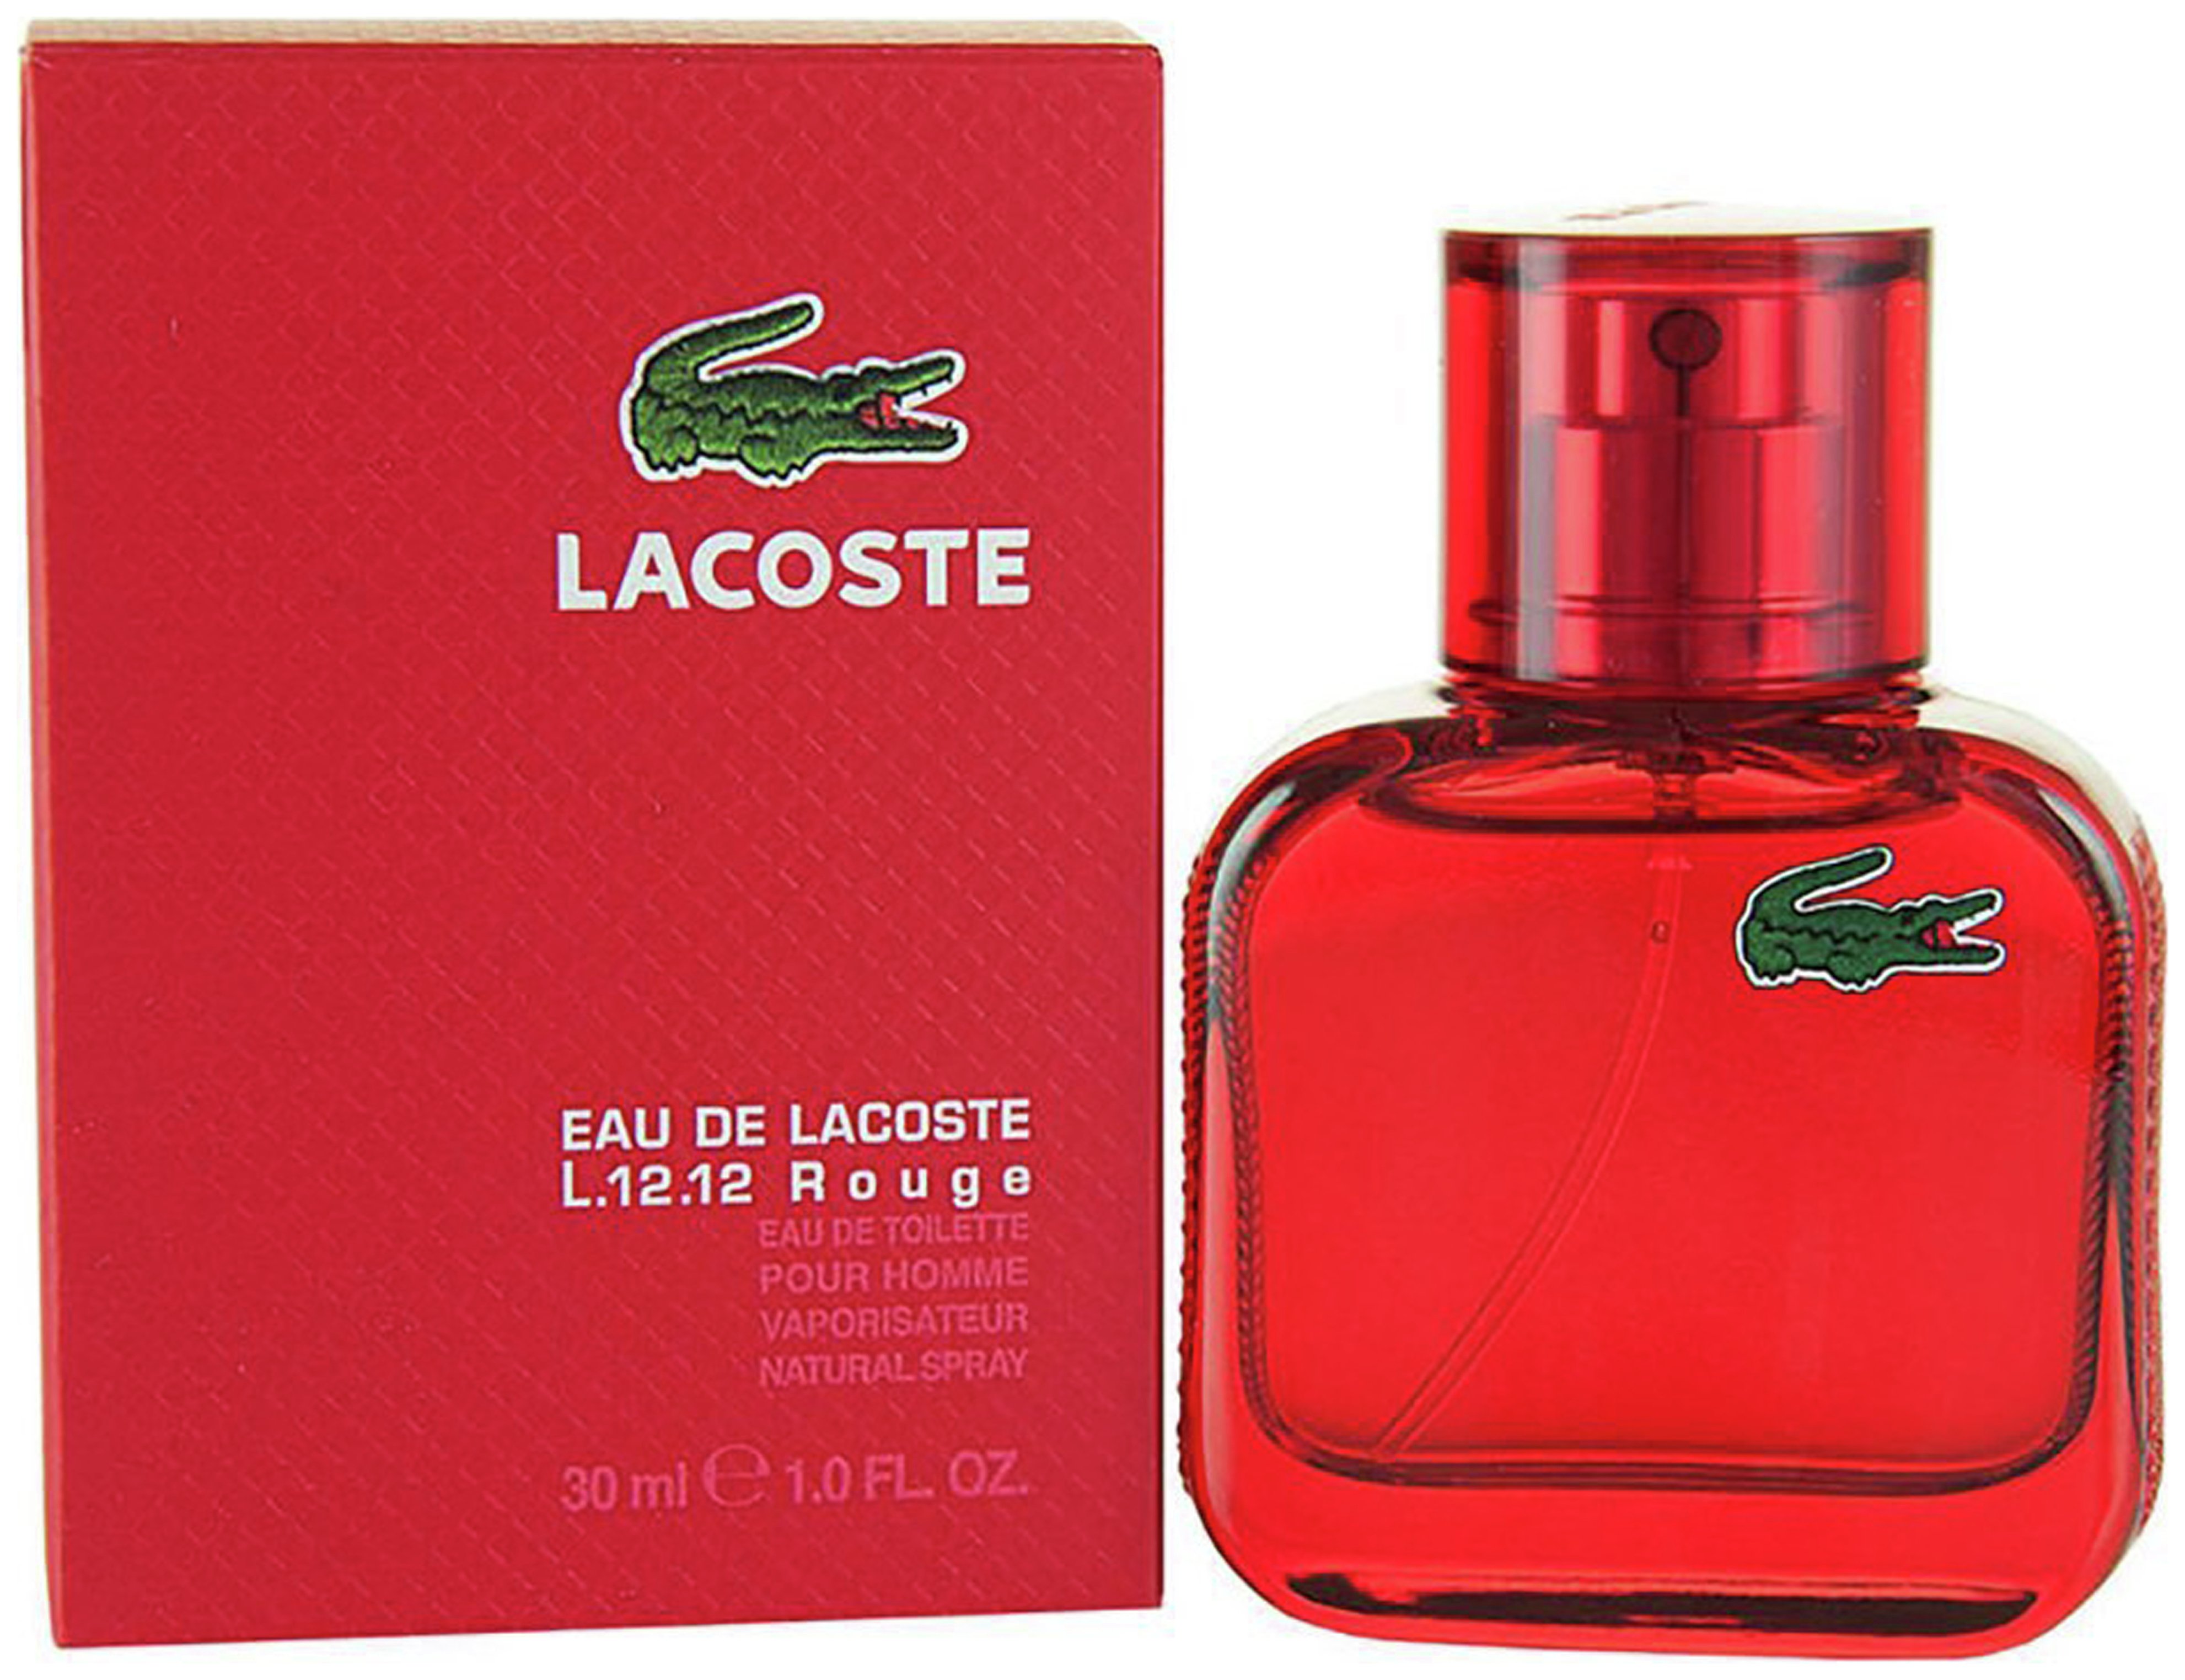 lacoste red perfume price